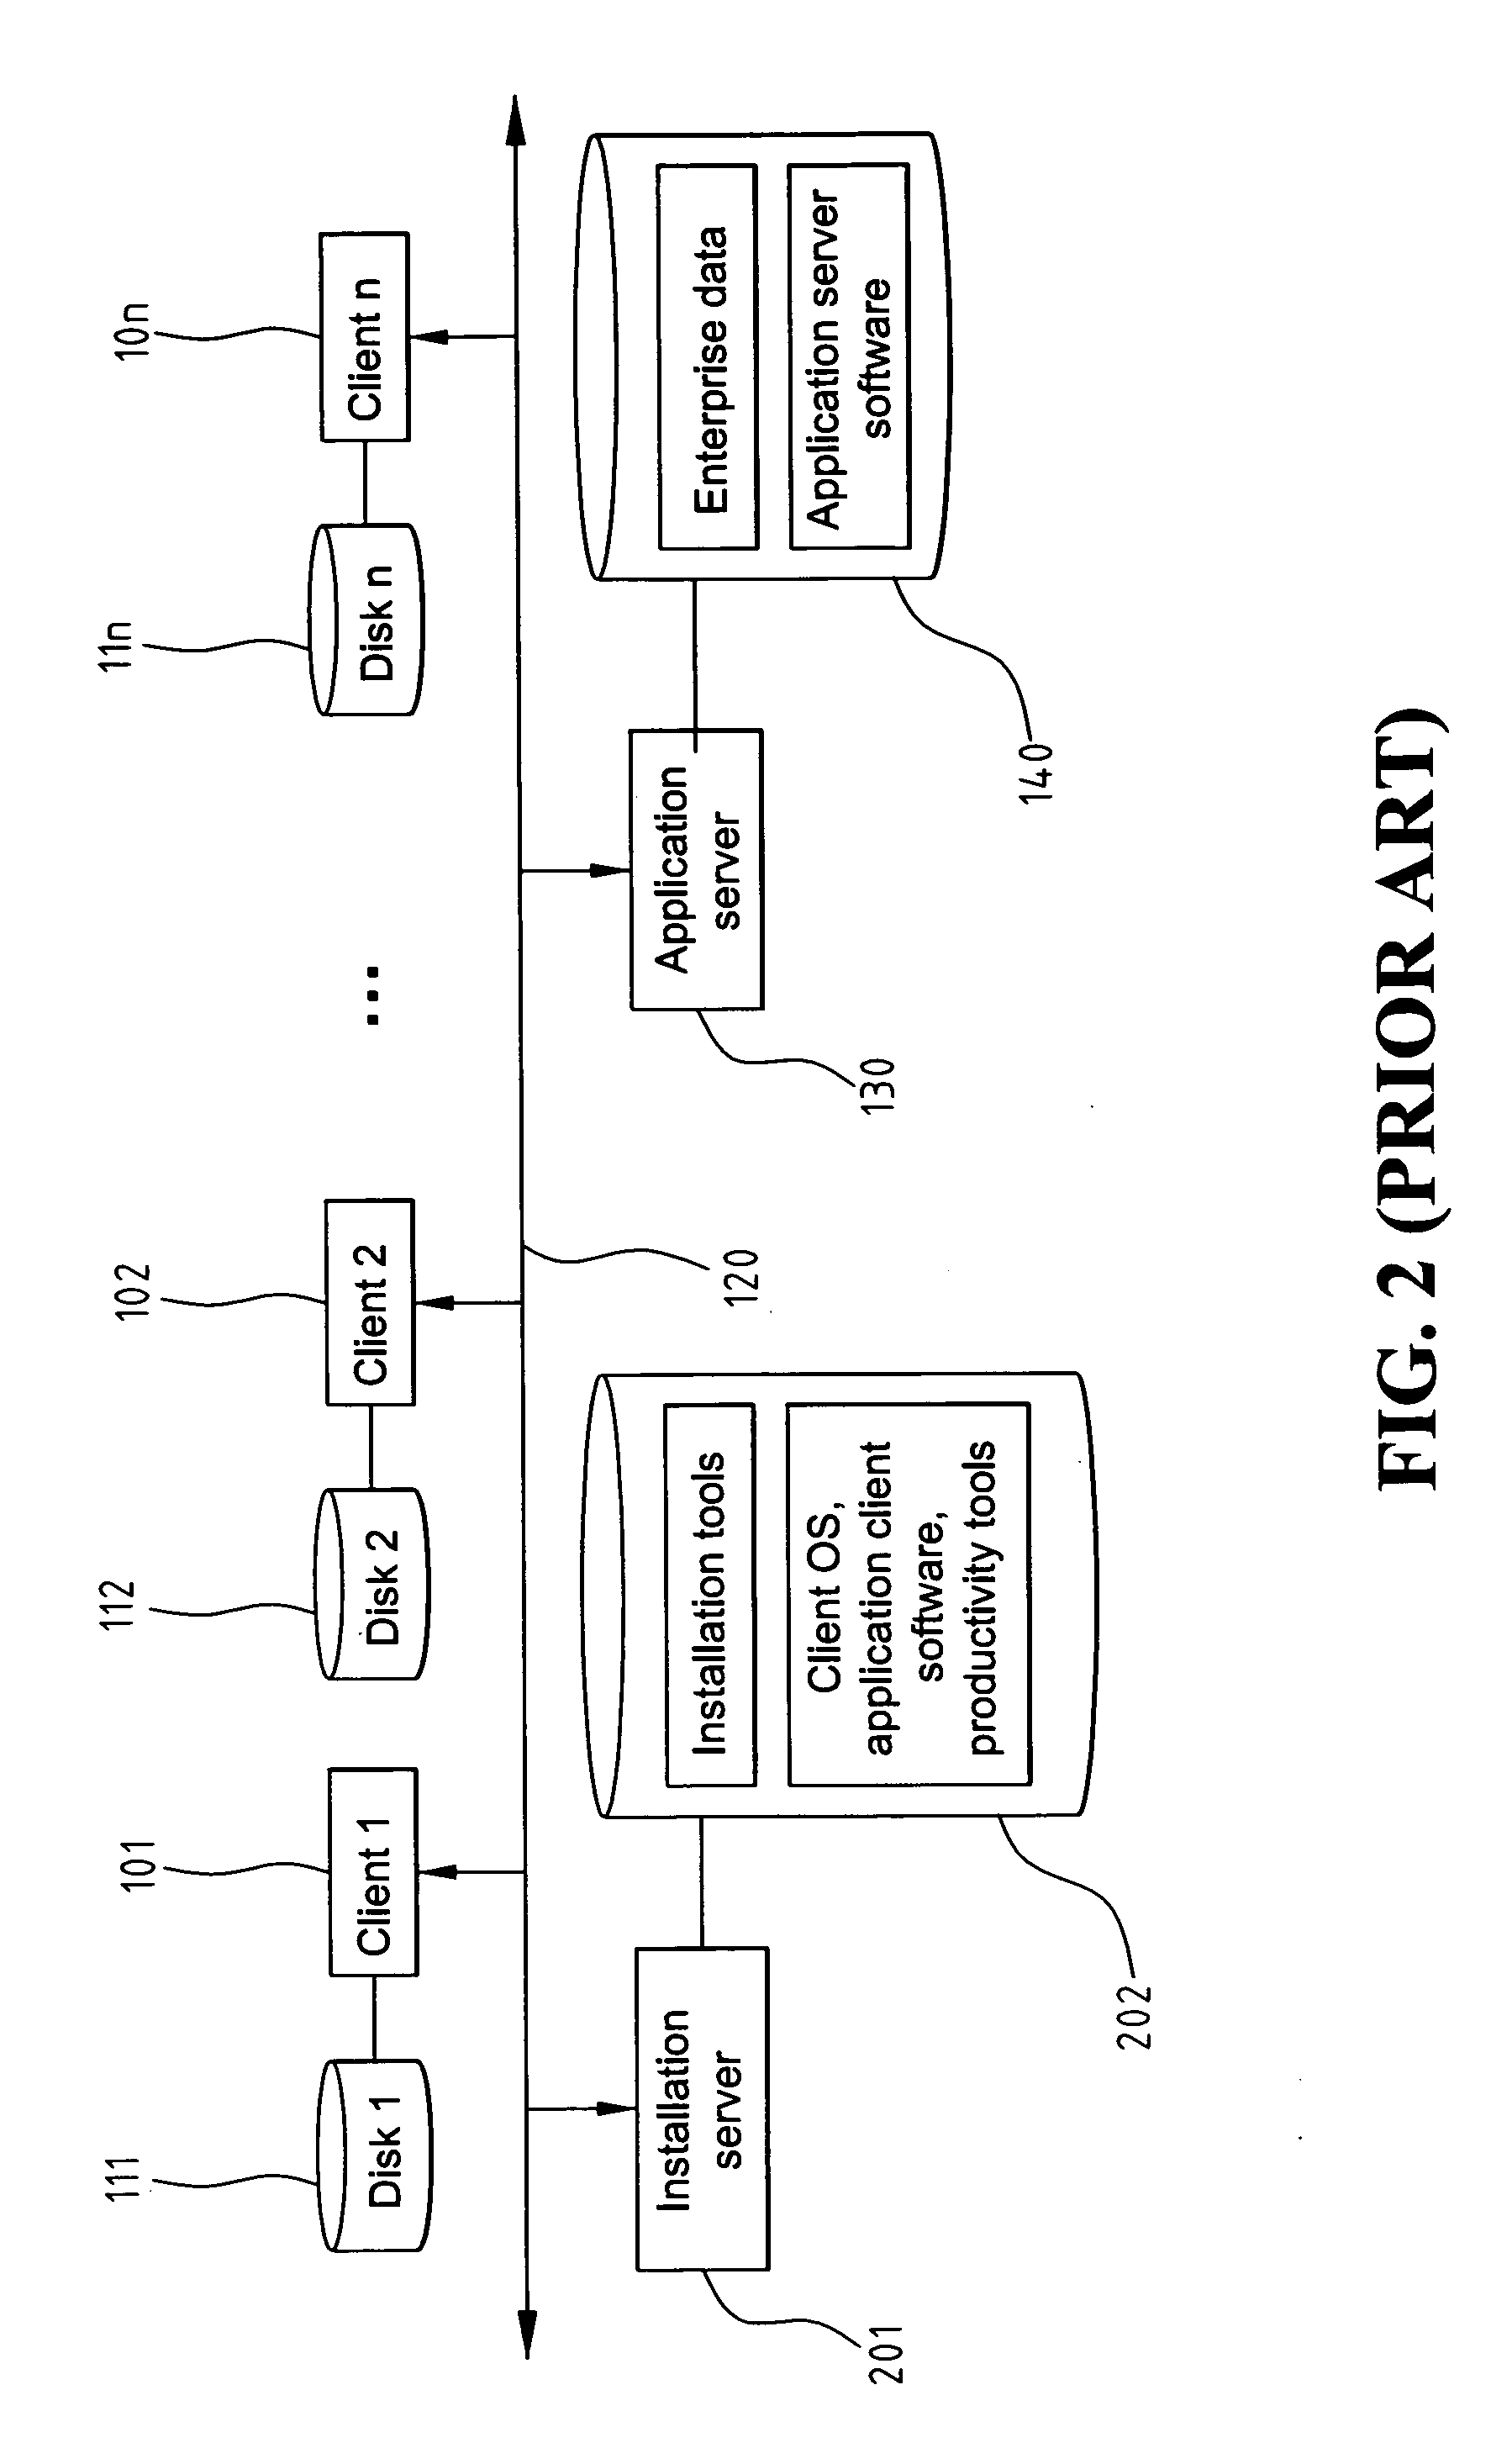 Apparatus and method for managing and transporting virtual disks over a network to networked stations